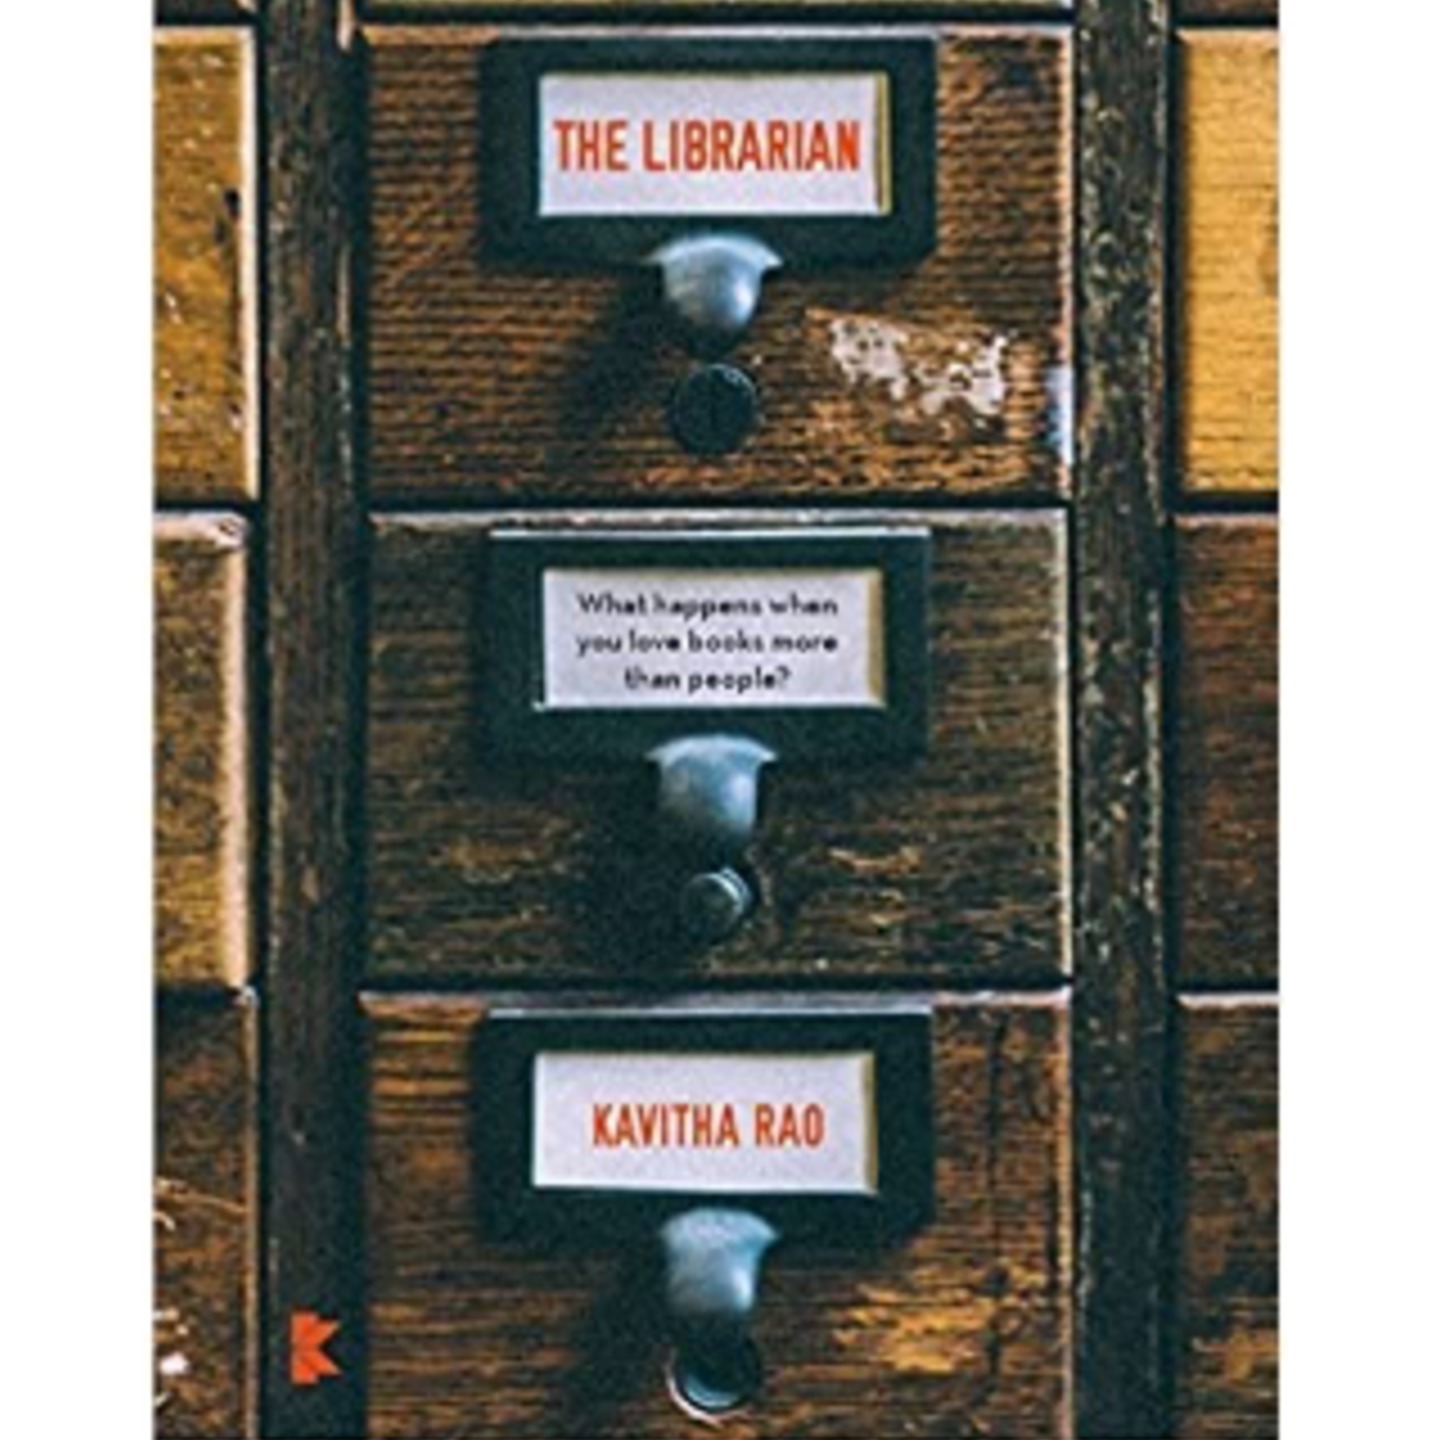 The Librarian by Kavitha Rao